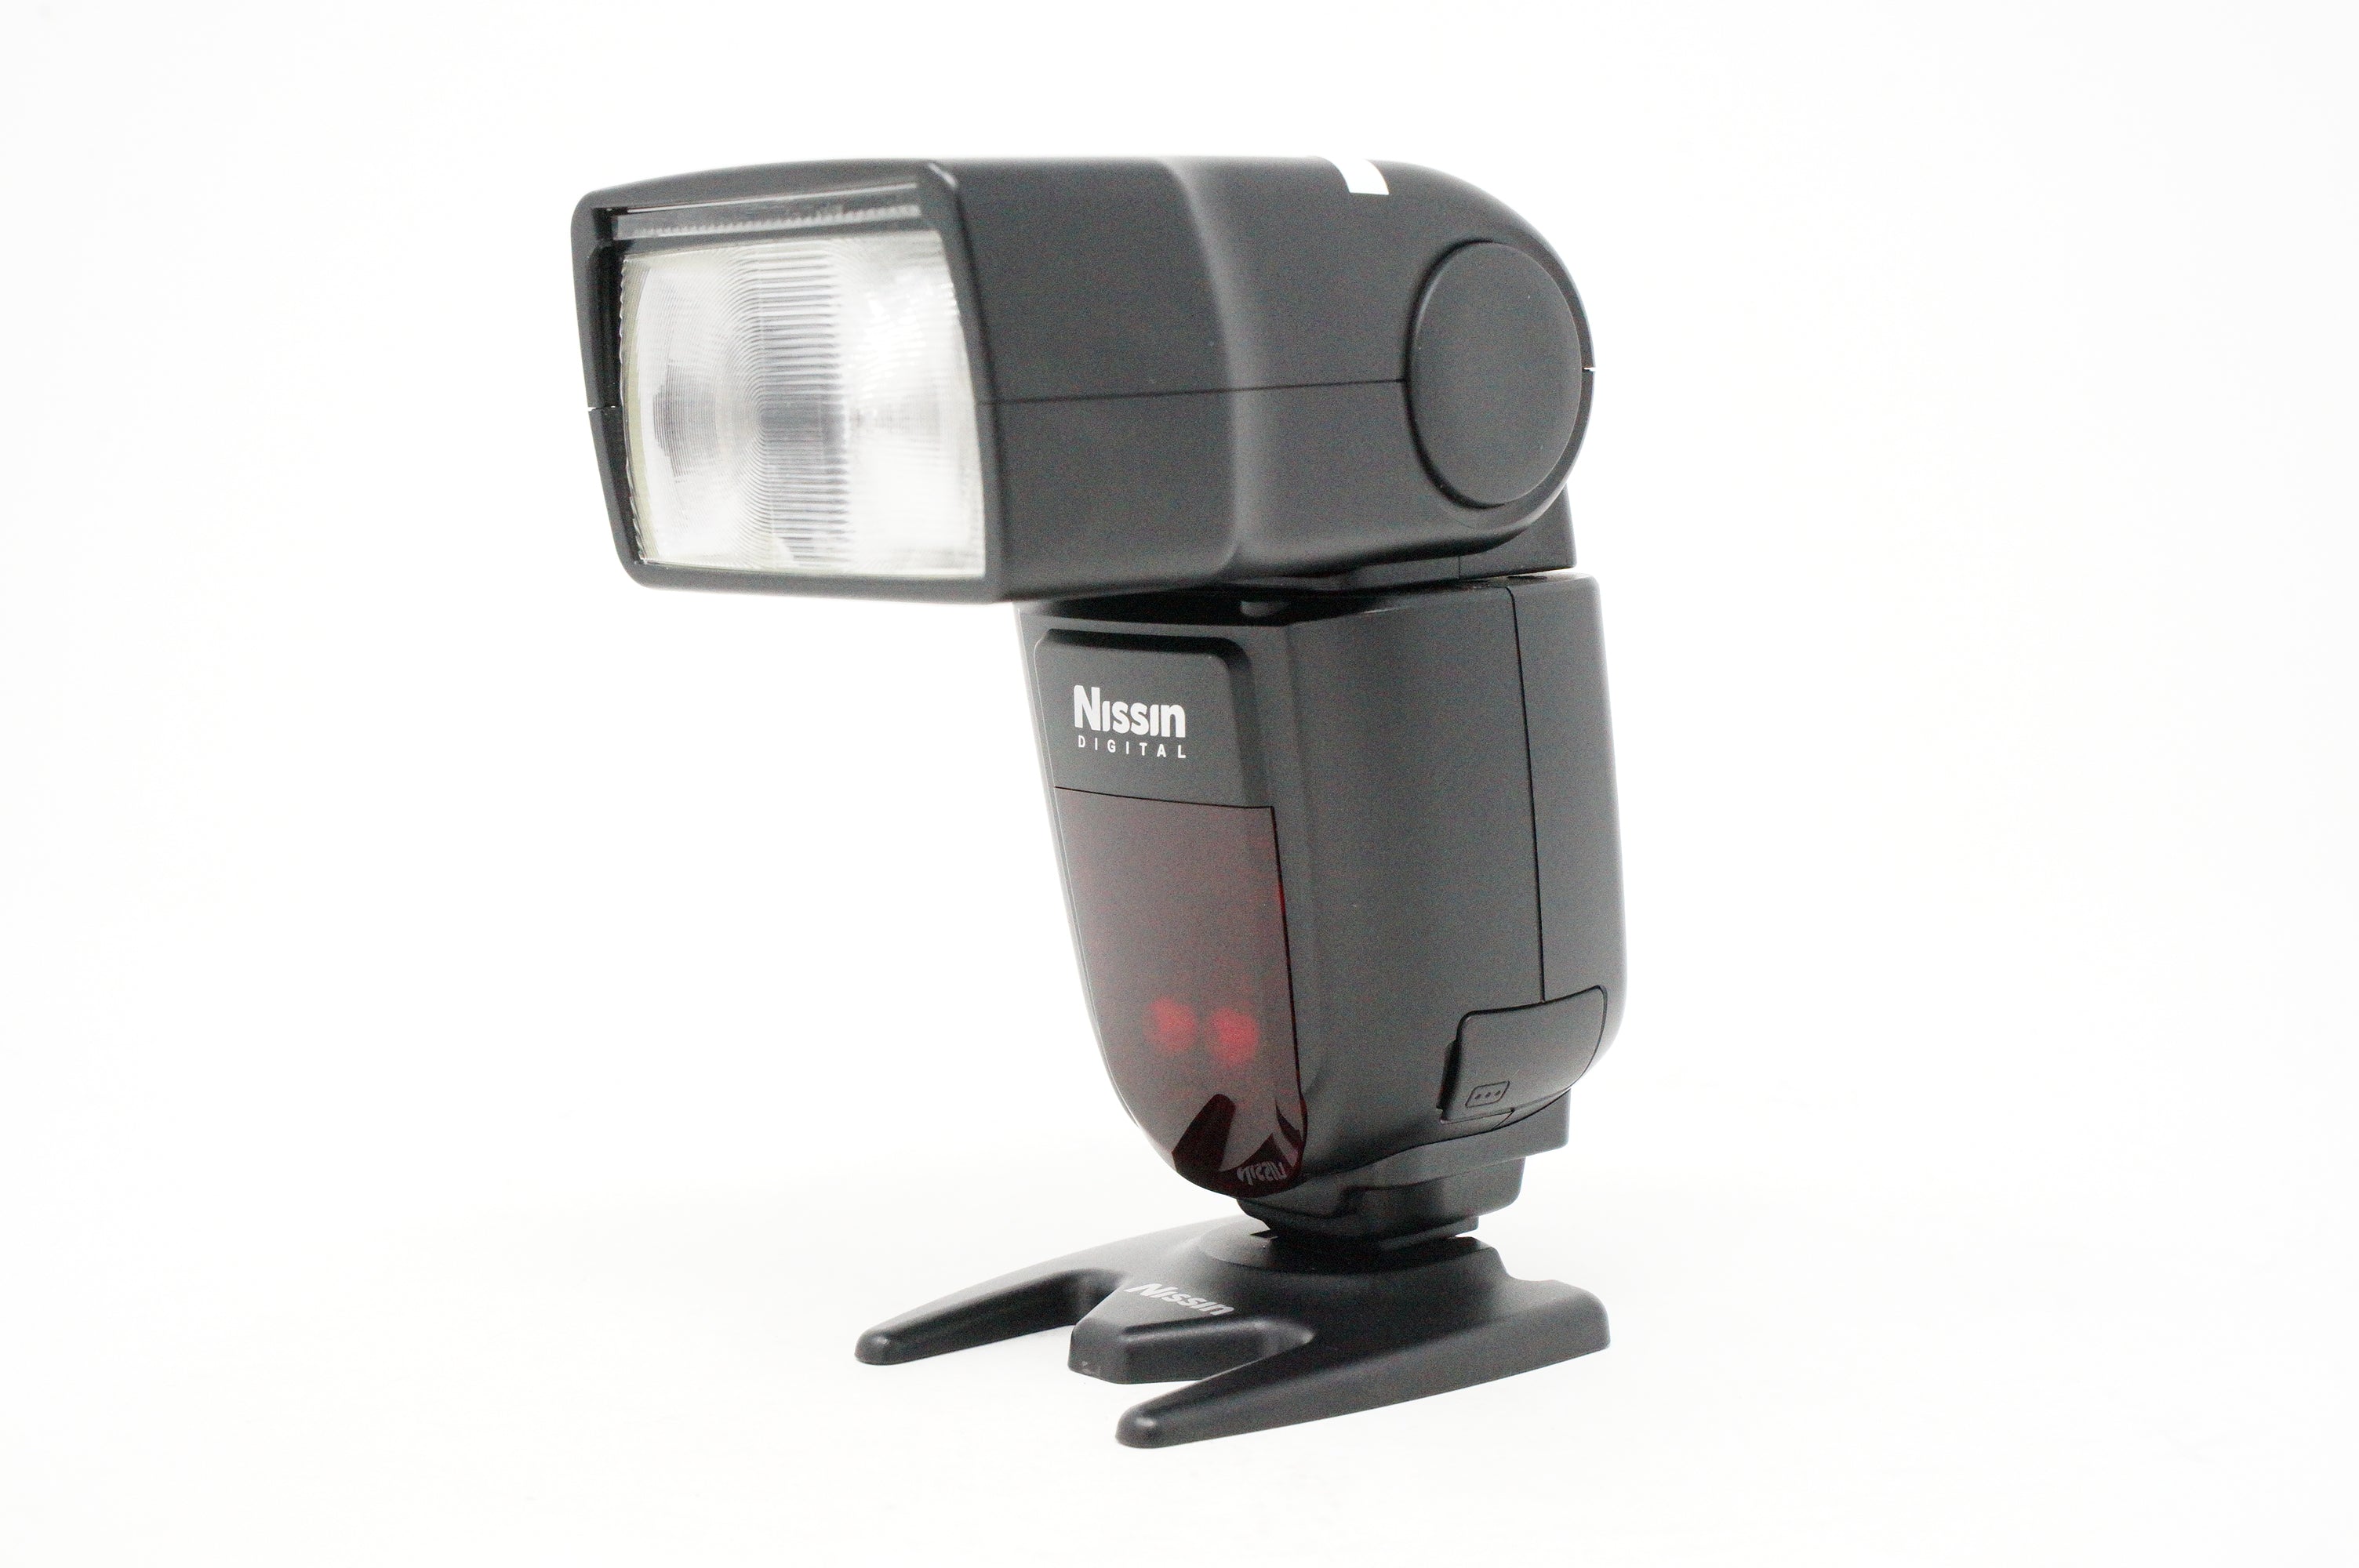 Used Nissin AIR 1 Di700A flashgun and trigger for Sony (Boxed SH39099)